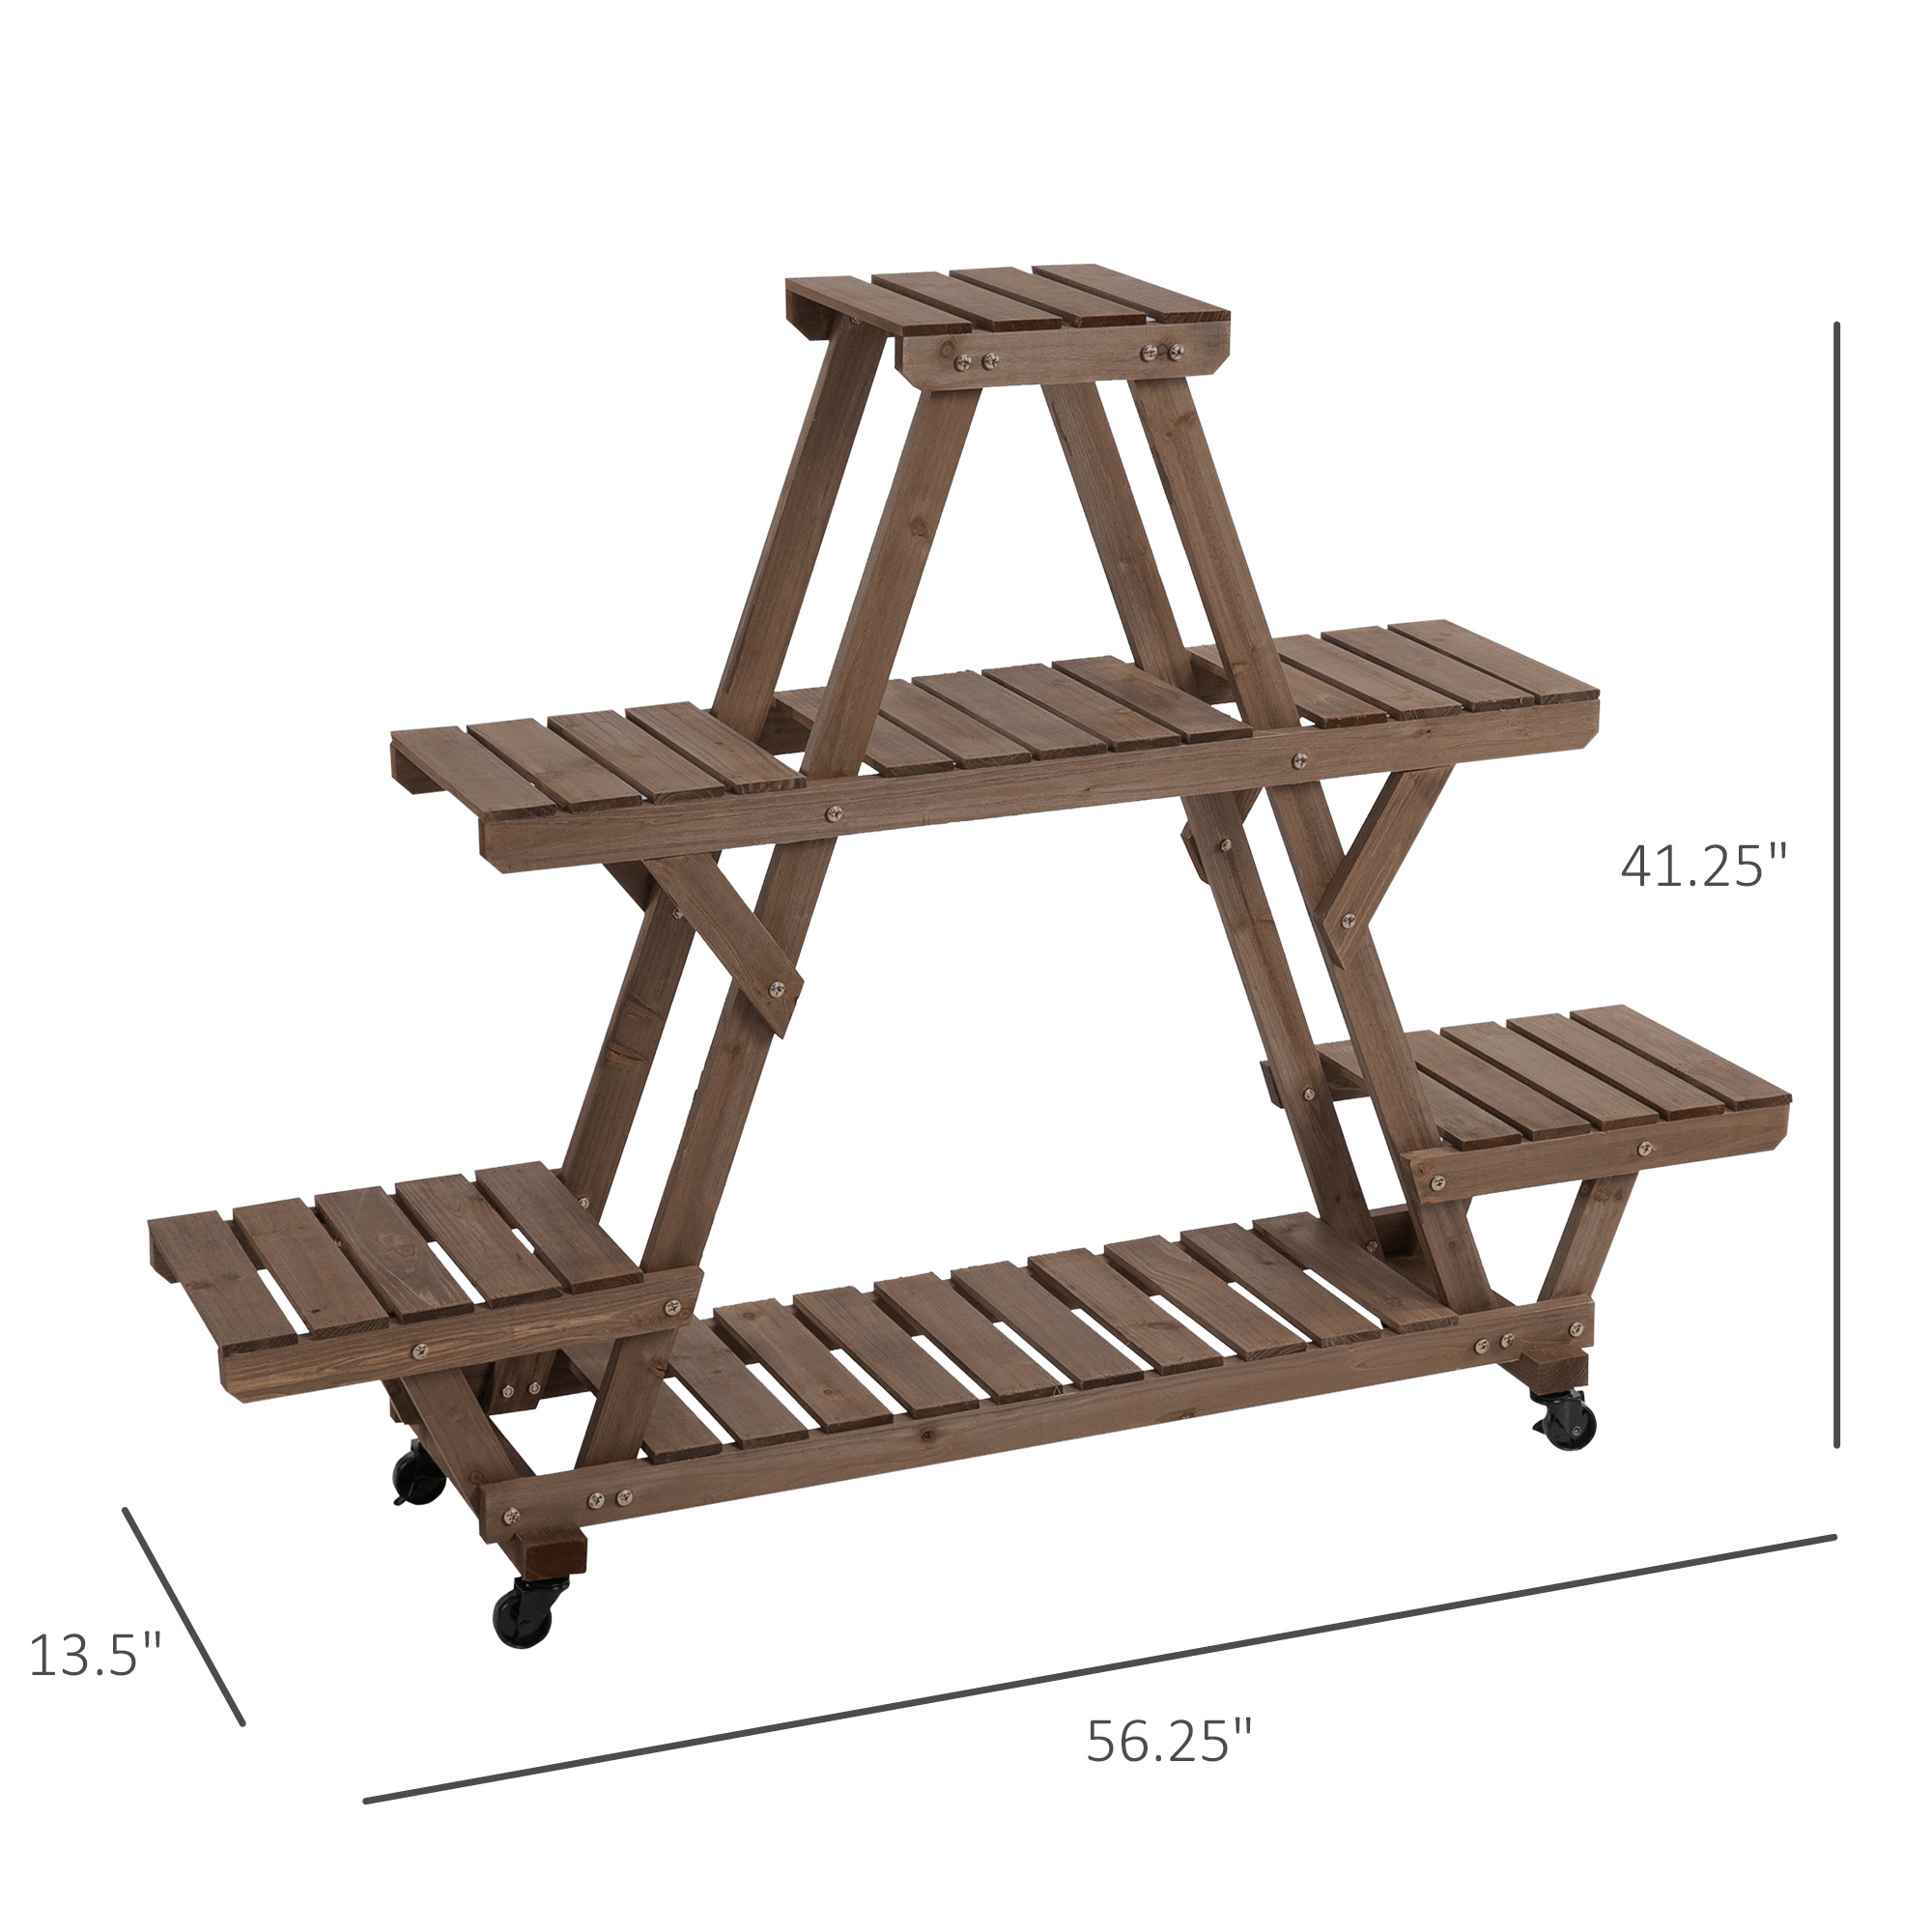 4 Tier Wooden Plant Shelf with wheels